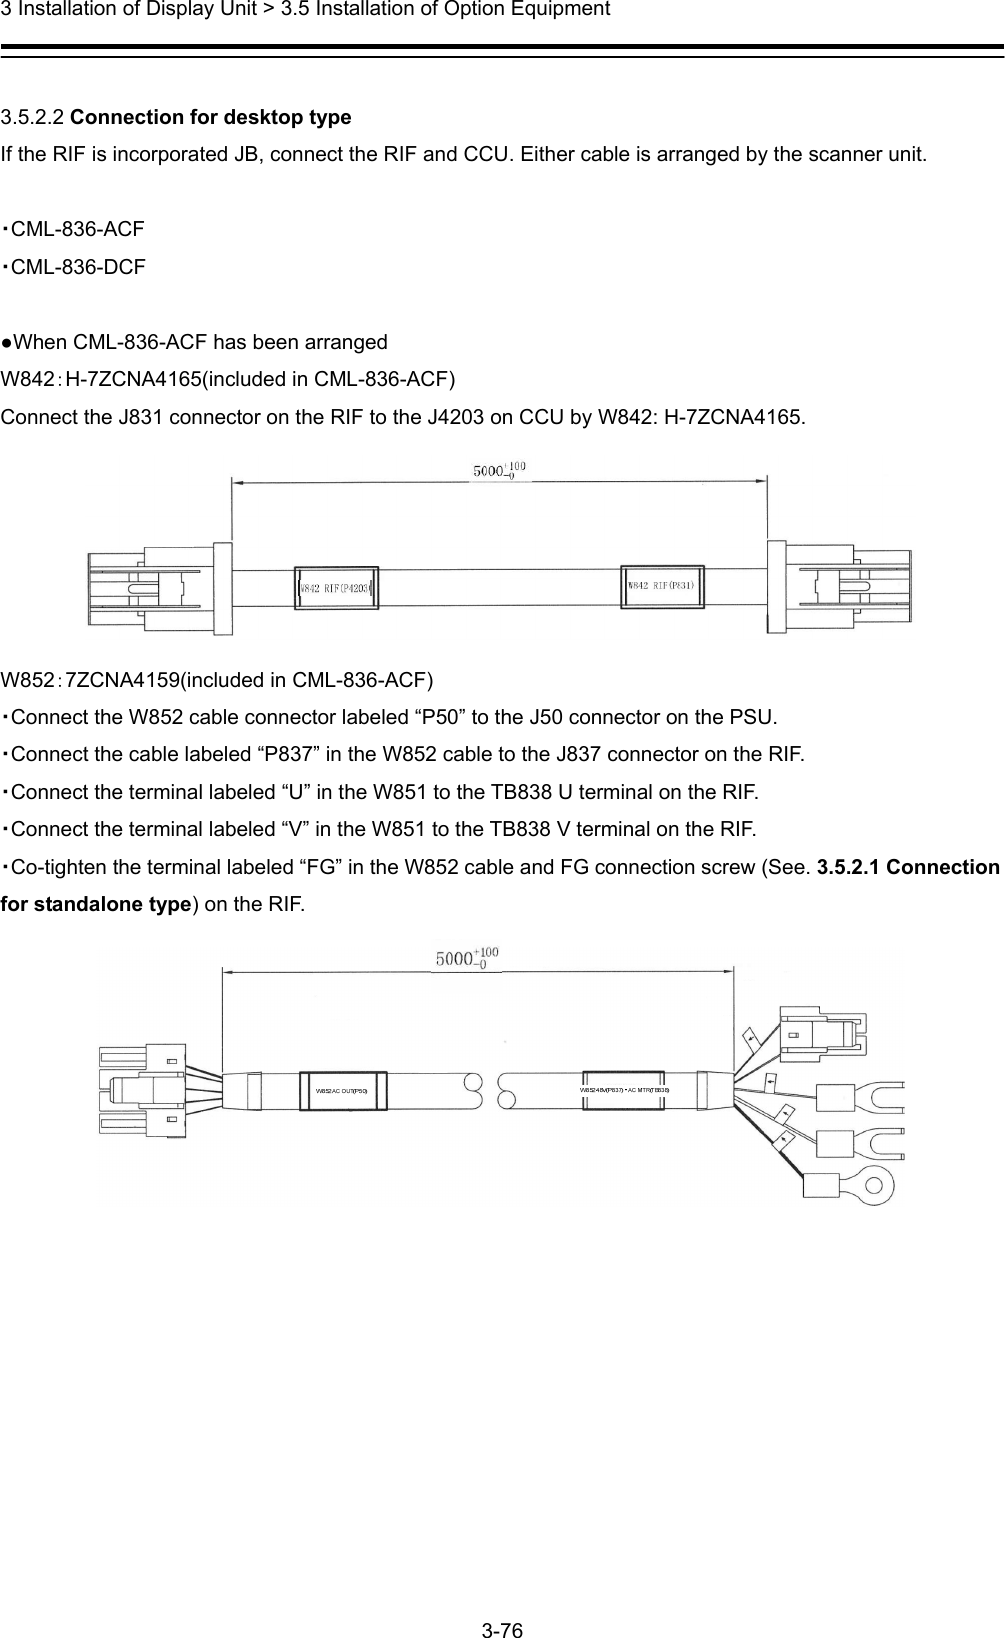  3 Installation of Display Unit &gt; 3.5 Installation of Option Equipment 3-76   3.5.2.2 Connection for desktop type If the RIF is incorporated JB, connect the RIF and CCU. Either cable is arranged by the scanner unit.  ・CML-836-ACF ・CML-836-DCF  ●When CML-836-ACF has been arranged   W842：H-7ZCNA4165(included in CML-836-ACF) Connect the J831 connector on the RIF to the J4203 on CCU by W842: H-7ZCNA4165.  W852：7ZCNA4159(included in CML-836-ACF) ・Connect the W852 cable connector labeled “P50” to the J50 connector on the PSU. ・Connect the cable labeled “P837” in the W852 cable to the J837 connector on the RIF.   ・Connect the terminal labeled “U” in the W851 to the TB838 U terminal on the RIF. ・Connect the terminal labeled “V” in the W851 to the TB838 V terminal on the RIF. ・Co-tighten the terminal labeled “FG” in the W852 cable and FG connection screw (See. 3.5.2.1 Connection for standalone type) on the RIF.  